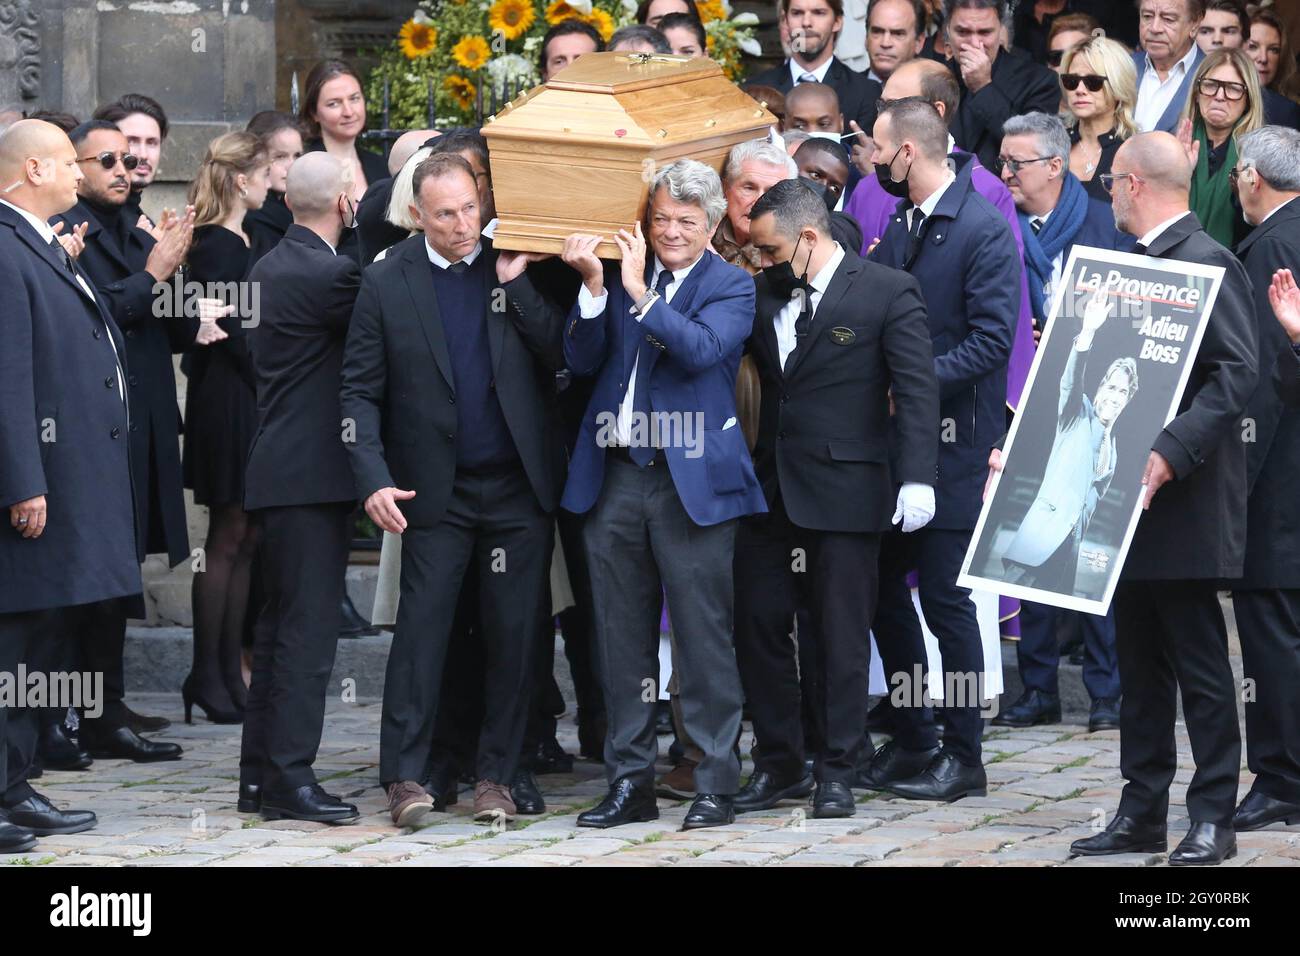 Jean-Pierre Papin and Jean-Louis Borloo carry the coffin during a tribute  mass for French tycoon Bernard Tapie at Saint Germain des Pres church in  Paris, France on October 6, 2021. The funeral